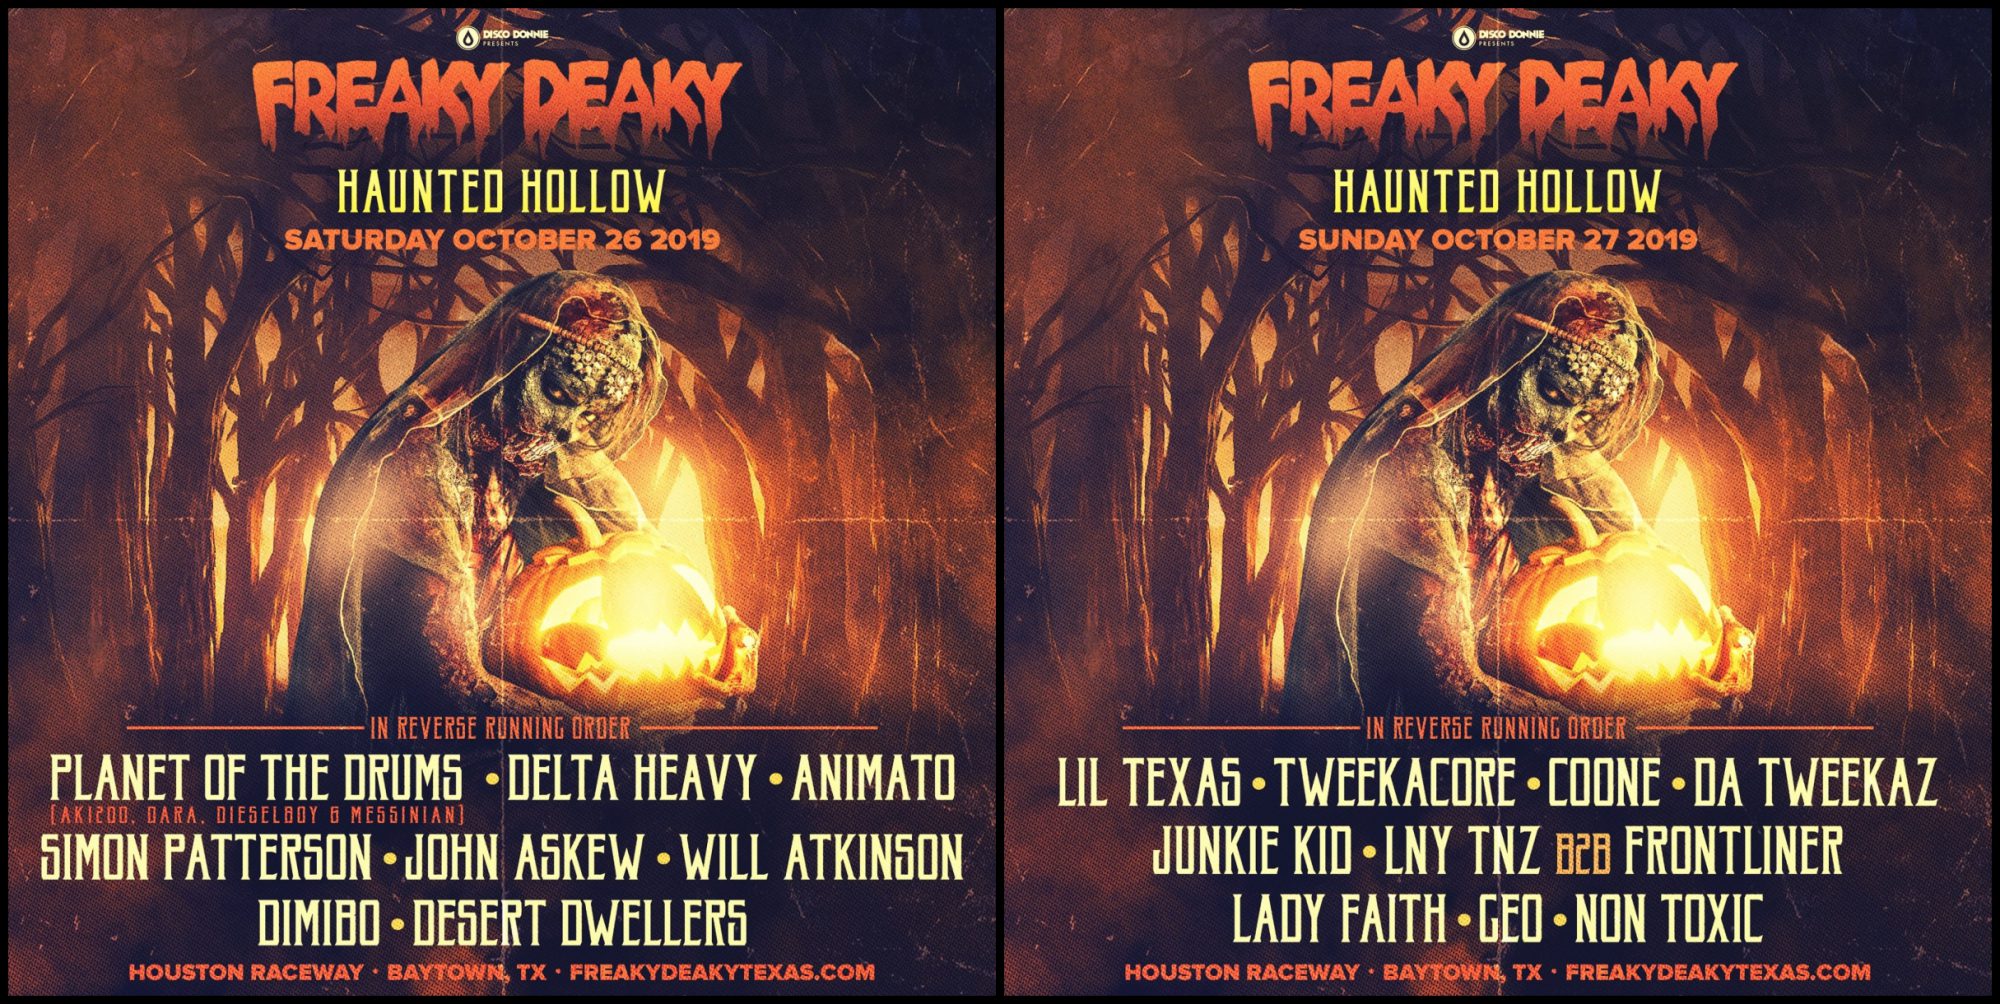 Freaky Deaky 2019 Haunted Hollow Stage